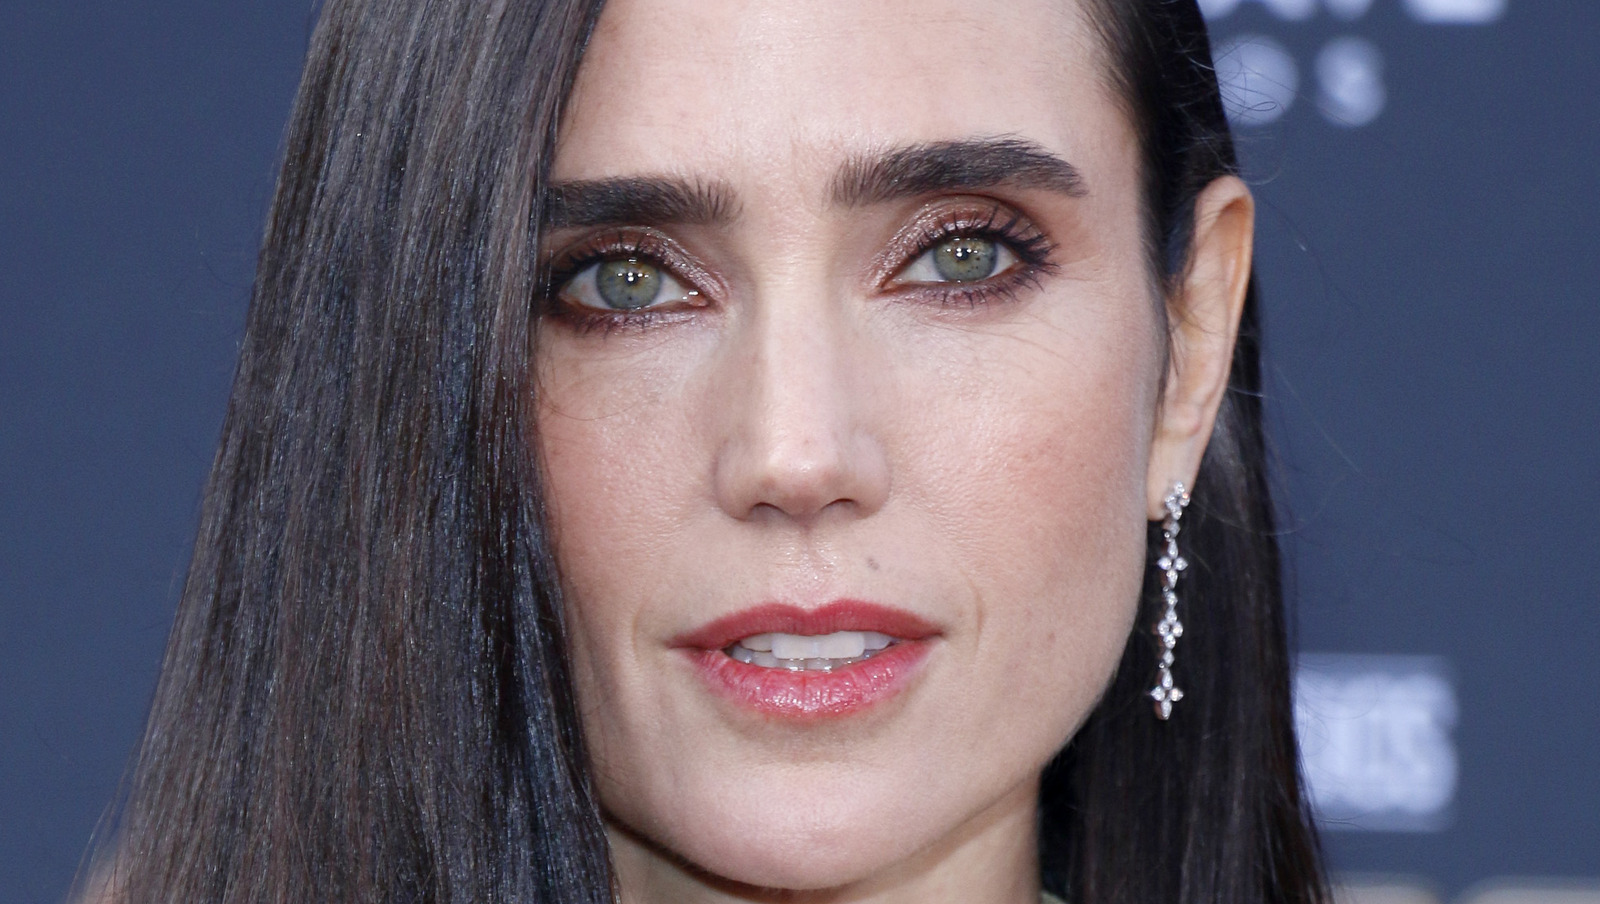 jennifer connelly career opportunities hd